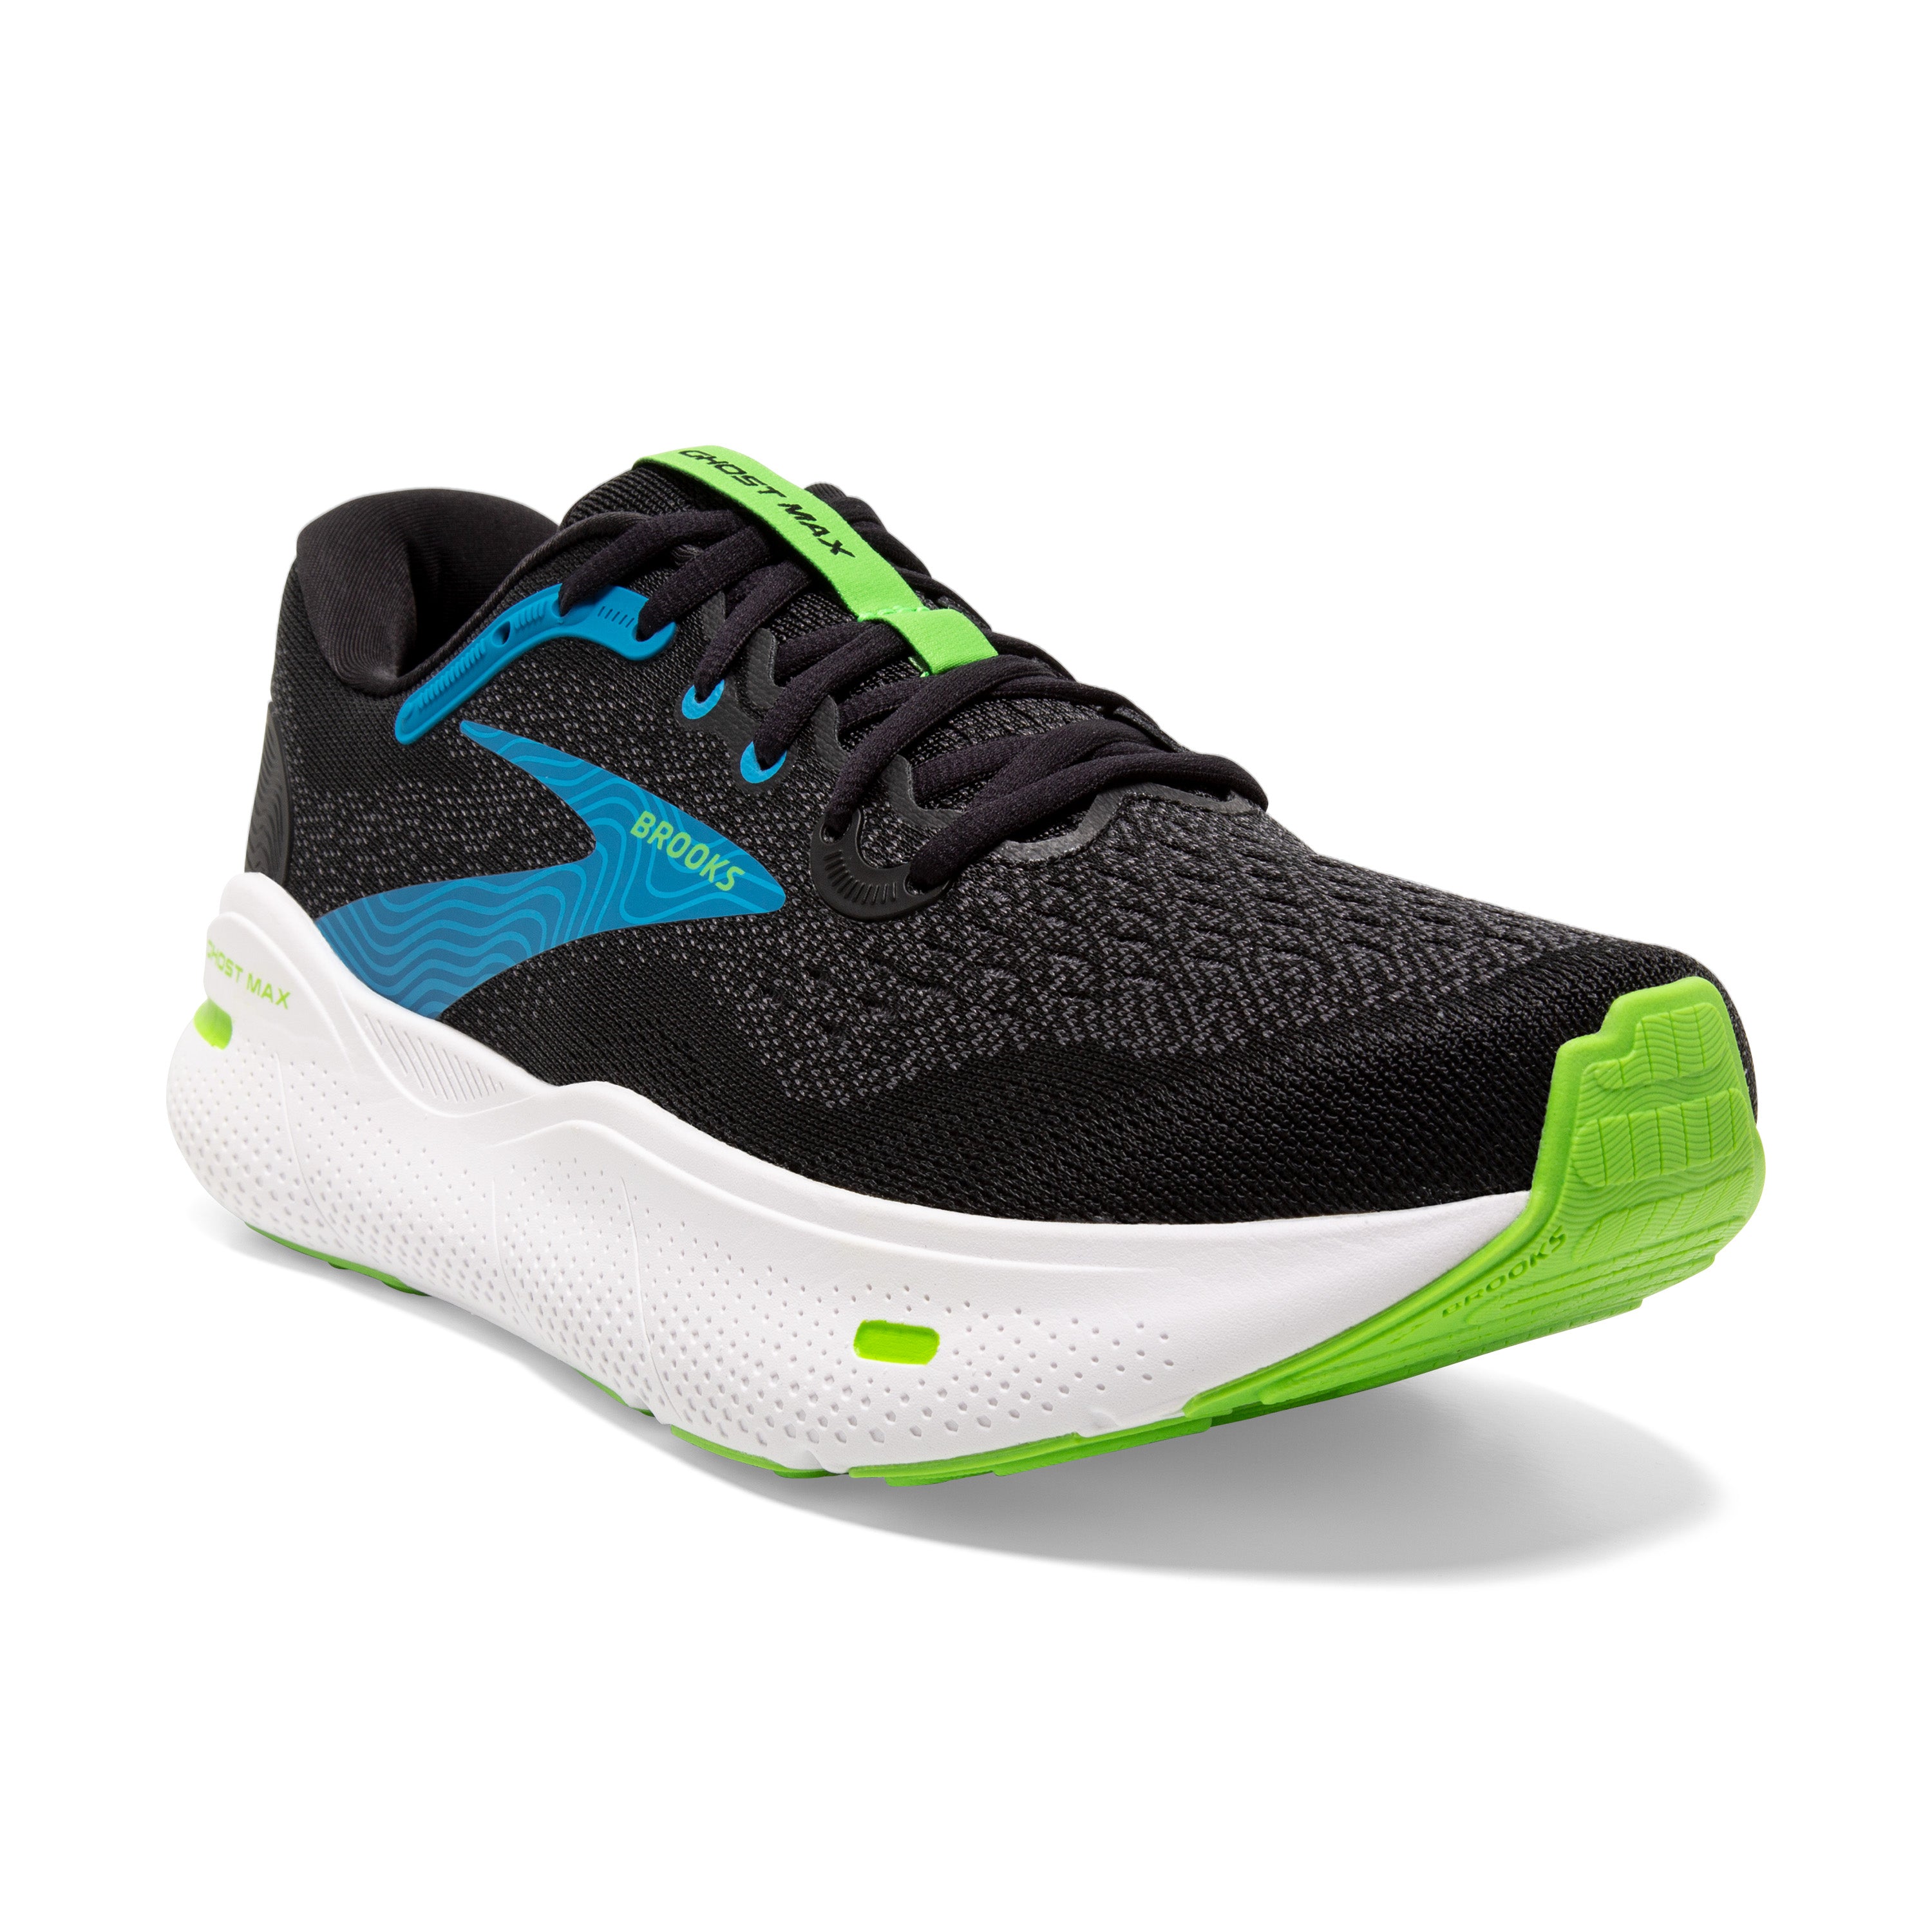 Ghost Max - Men's Road Running Shoes